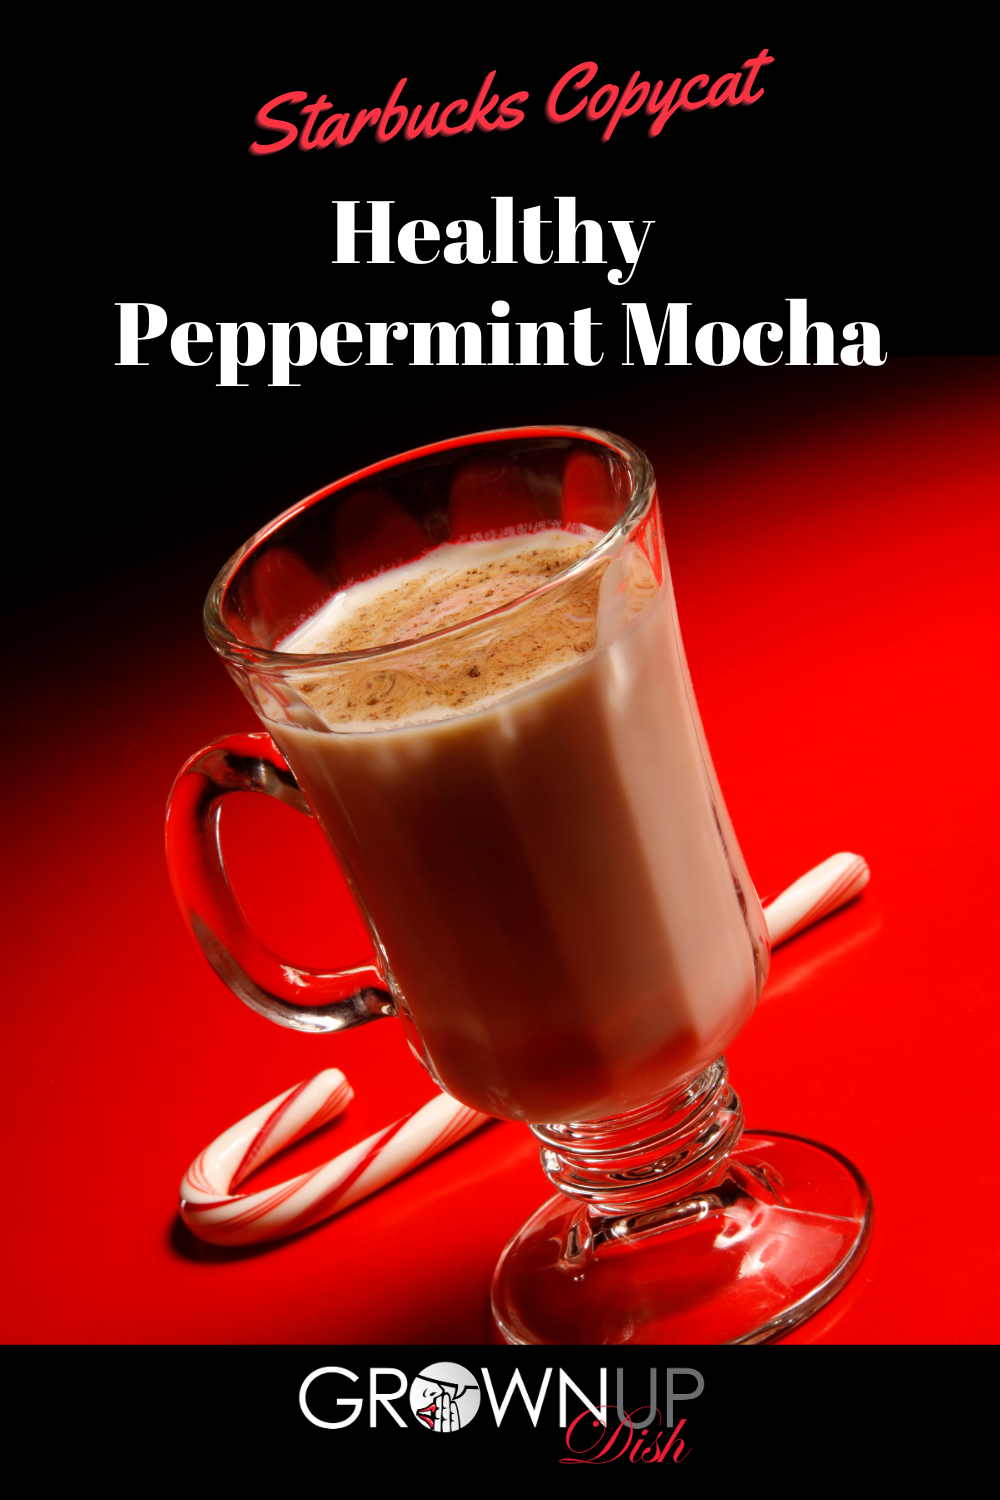 Healthy peppermint mocha recipe tastes just like Starbucks with 1/3 of the sugar. Just 3 ingredients and it tastes identical! | www.grownupdish.com